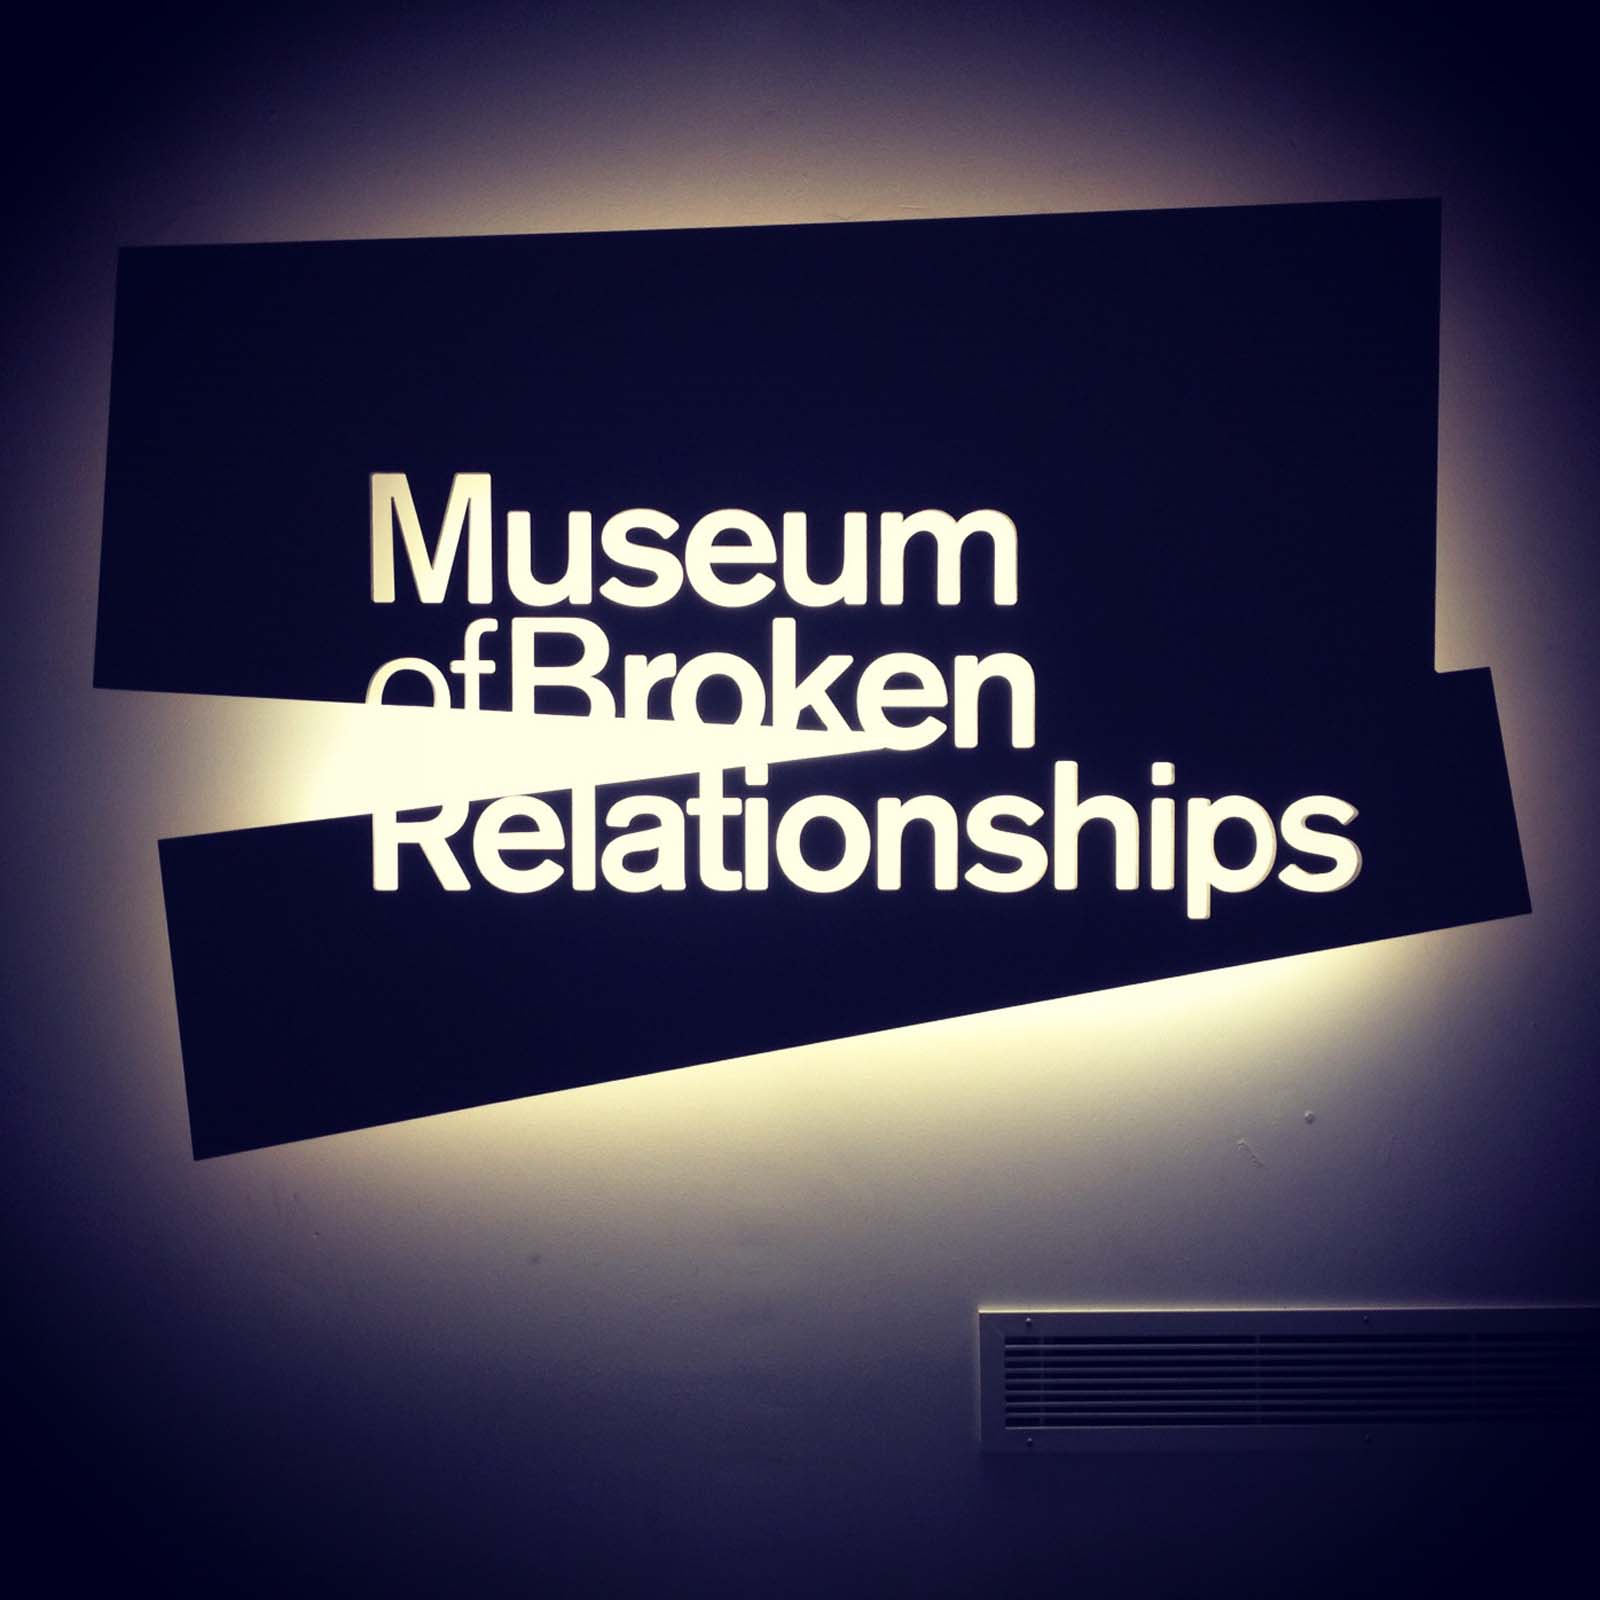 unique things to do in croatia museum of broken relationships